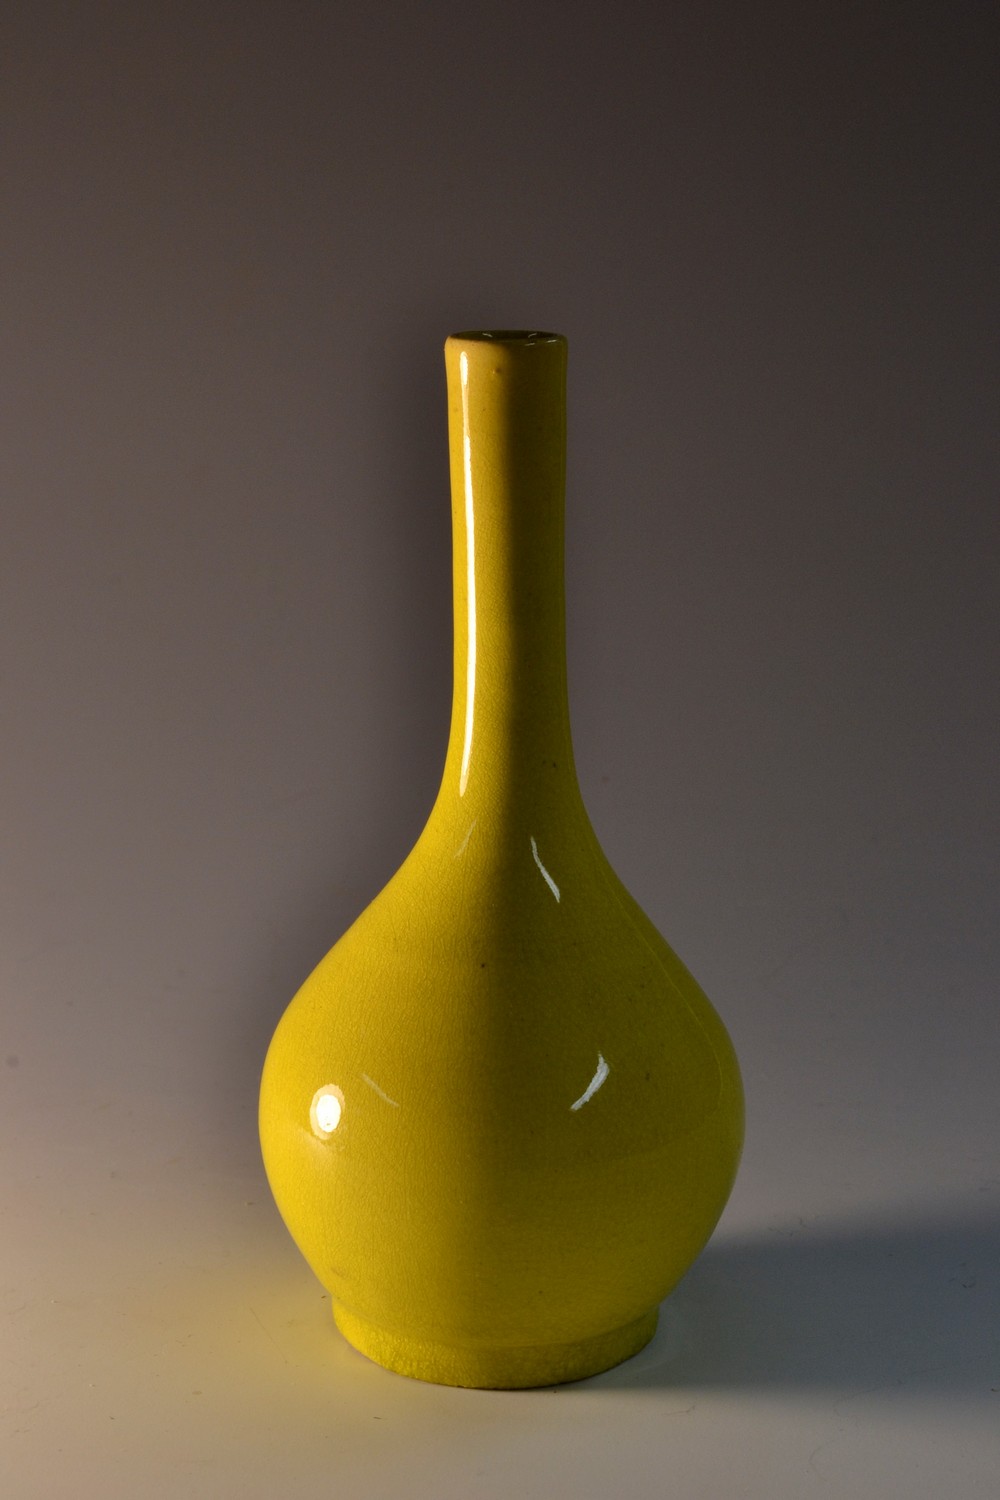 A 19th century Chinese bottle vase, boldly glazed in vibrant yellow, circular foot, 12.